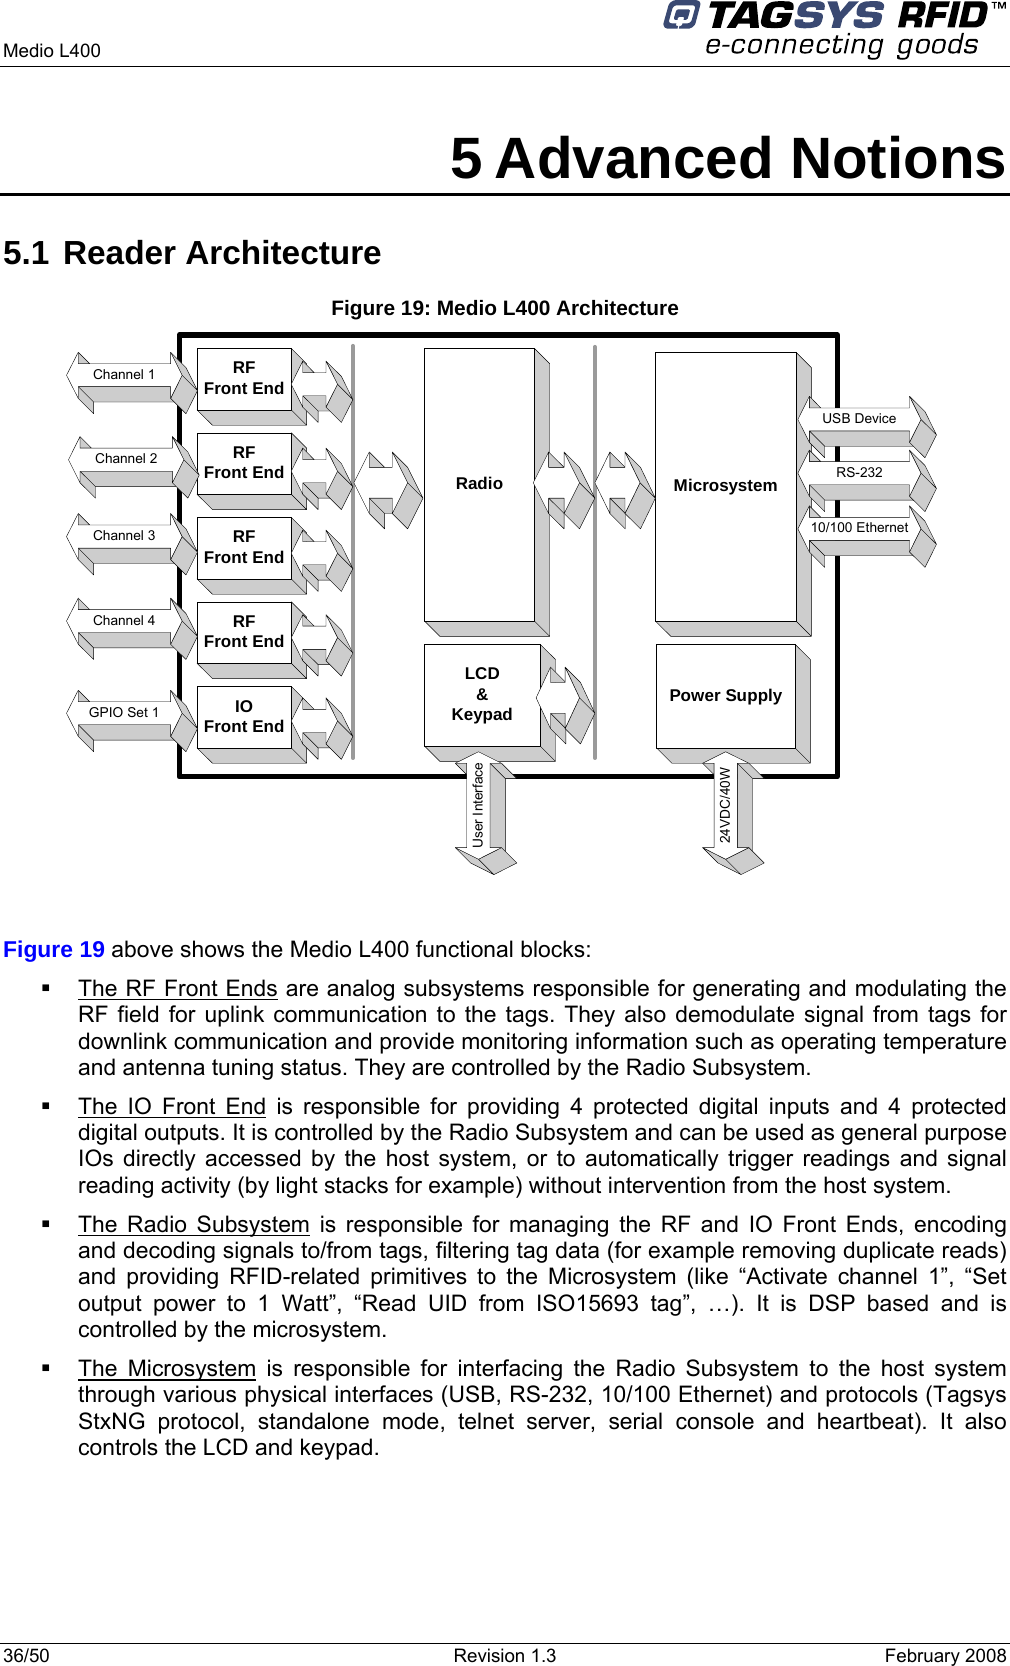  Medio L400     36/50  Revision 1.3  February 2008  5 Advanced Notions 5.1 Reader Architecture Figure 19: Medio L400 Architecture Radio MicrosystemRFFront EndRFFront EndRFFront EndRFFront EndIOFront EndChannel 2Channel 1Channel 3Channel 4GPIO Set 1USB DeviceRS-23210/100 EthernetPower Supply24VDC/40WLCD&amp;KeypadUser Interface Figure 19 above shows the Medio L400 functional blocks:   The RF Front Ends are analog subsystems responsible for generating and modulating the RF field for uplink communication to the tags. They also demodulate signal from tags for downlink communication and provide monitoring information such as operating temperature and antenna tuning status. They are controlled by the Radio Subsystem.    The IO Front End is responsible for providing 4 protected digital inputs and 4 protected digital outputs. It is controlled by the Radio Subsystem and can be used as general purpose IOs directly accessed by the host system, or to automatically trigger readings and signal reading activity (by light stacks for example) without intervention from the host system.   The Radio Subsystem is responsible for managing the RF and IO Front Ends, encoding and decoding signals to/from tags, filtering tag data (for example removing duplicate reads) and providing RFID-related primitives to the Microsystem (like “Activate channel 1”, “Set output power to 1 Watt”, “Read UID from ISO15693 tag”, …). It is DSP based and is controlled by the microsystem.  The Microsystem is responsible for interfacing the Radio Subsystem to the host system through various physical interfaces (USB, RS-232, 10/100 Ethernet) and protocols (Tagsys StxNG protocol, standalone mode, telnet server, serial console and heartbeat). It also controls the LCD and keypad.  